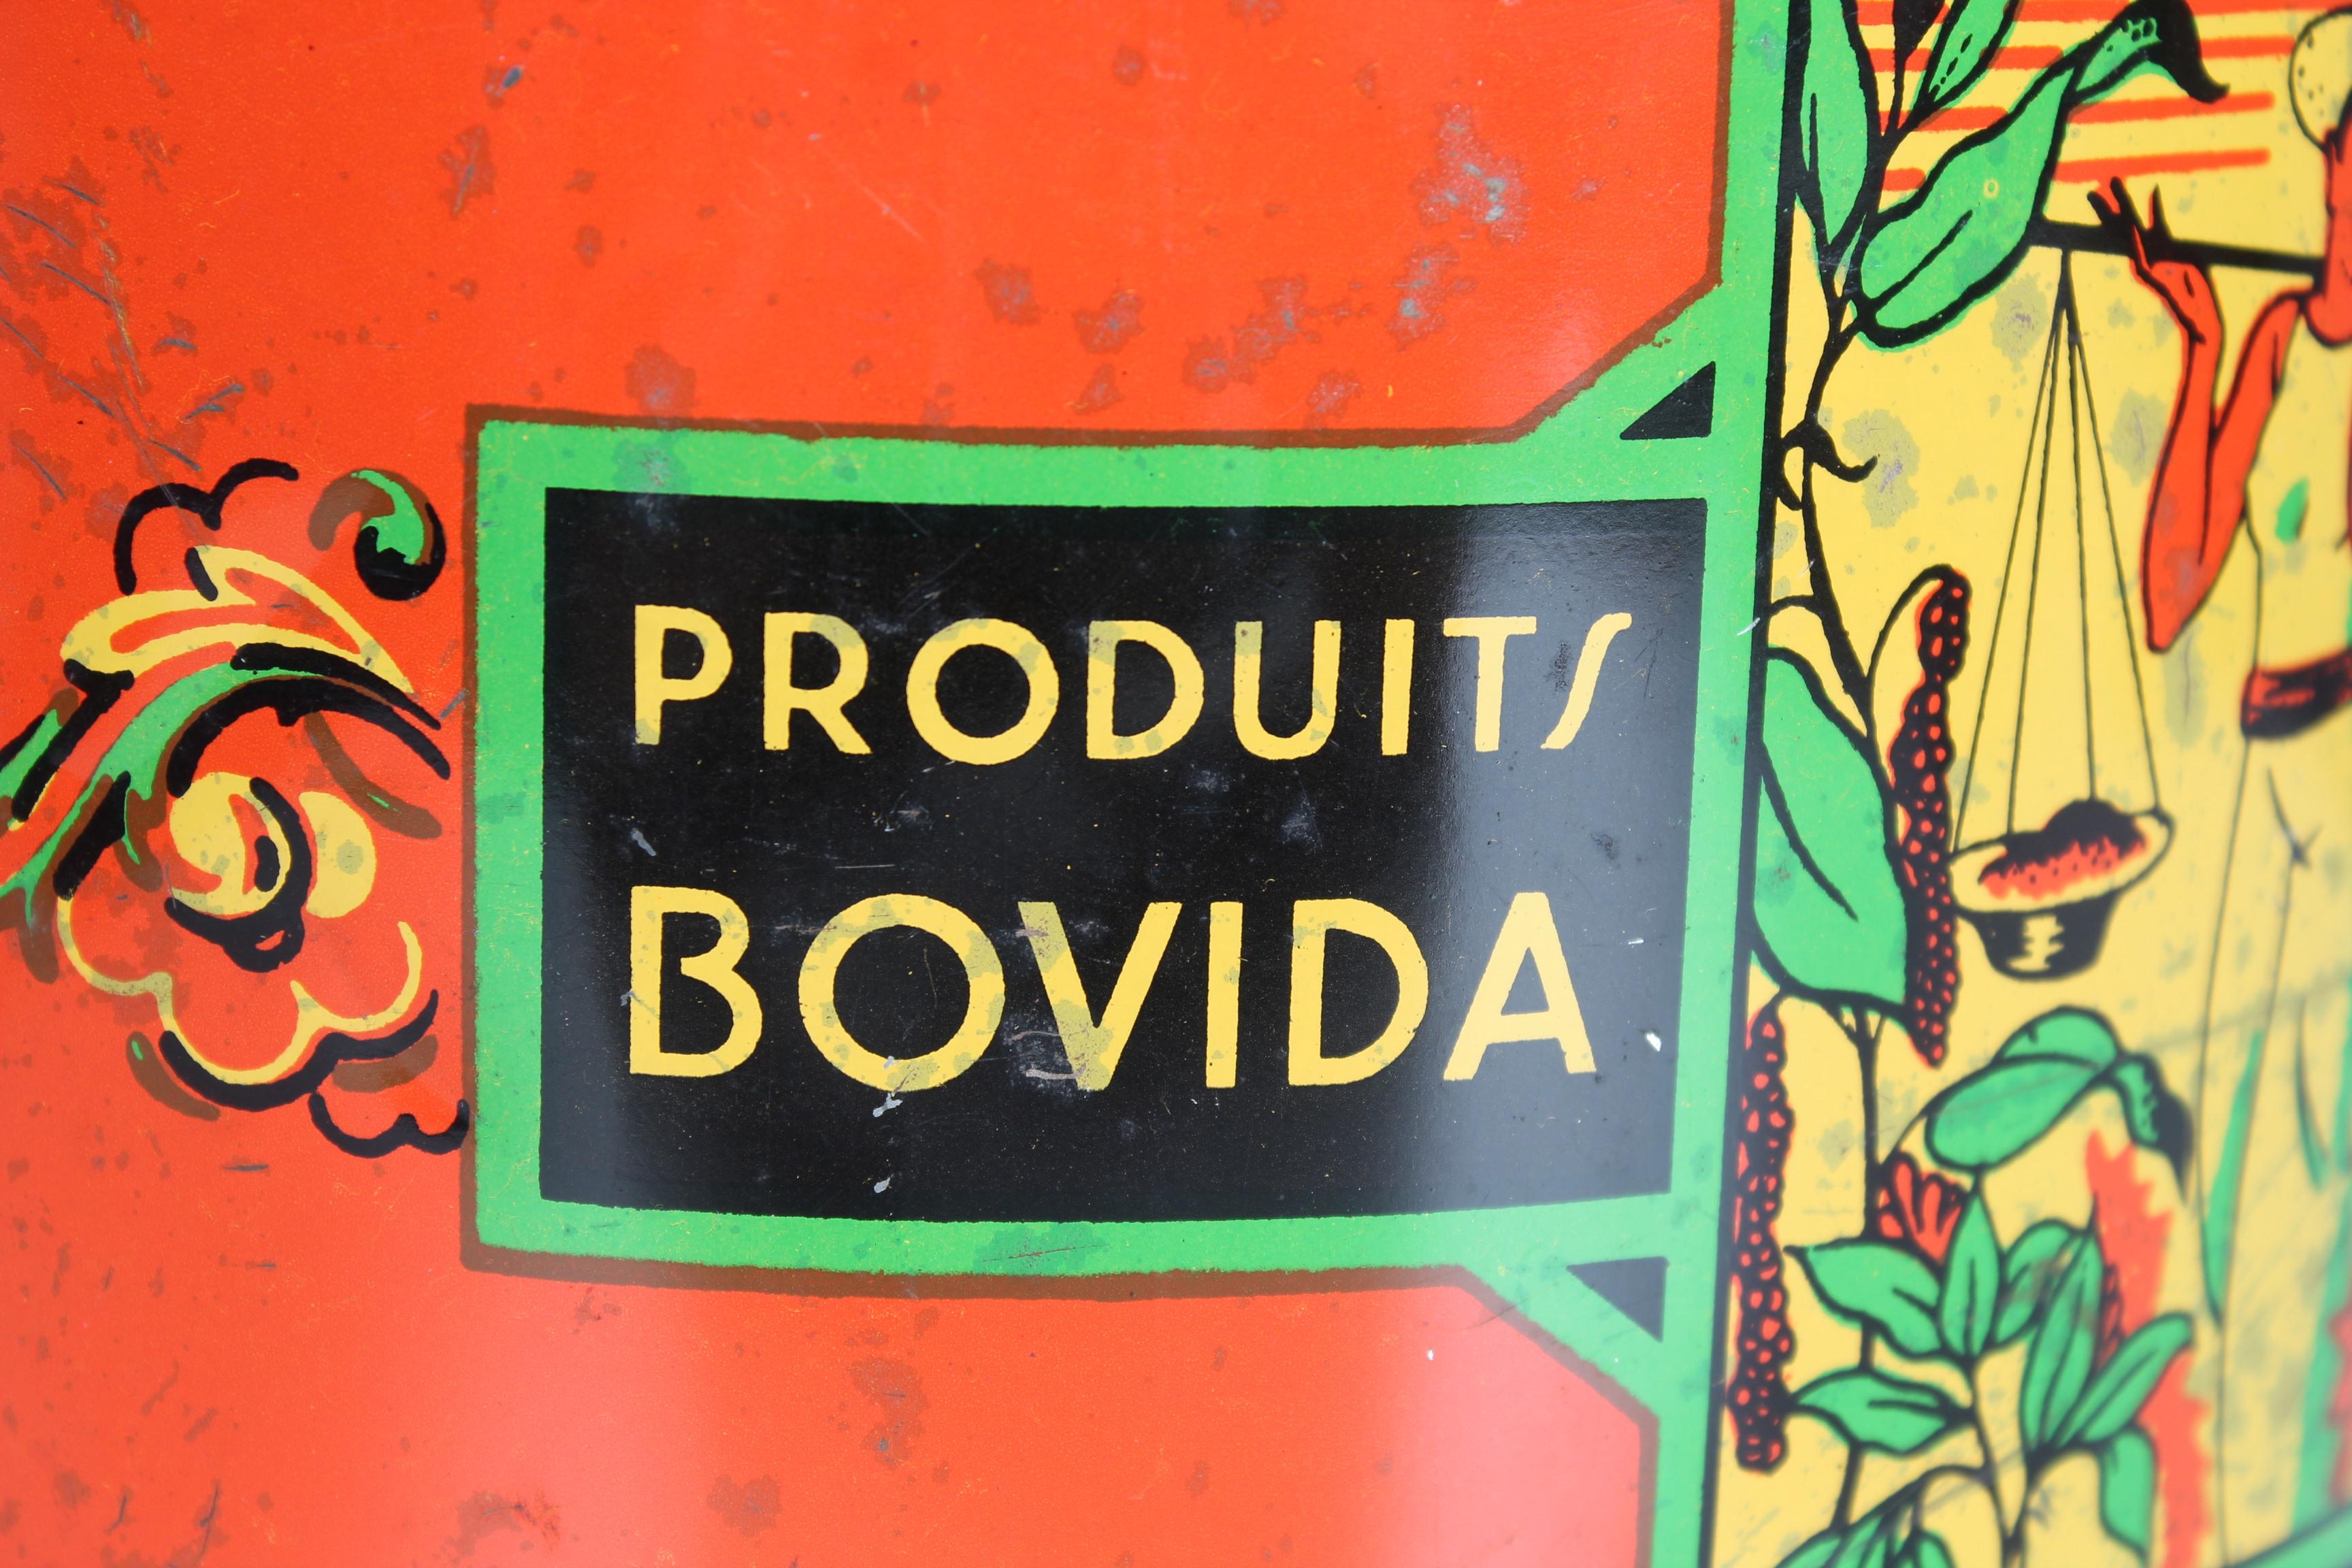 French Large Antique Tin Can, Art Deco, 1930s, France, Produits Bovida, Coffee Tin Can